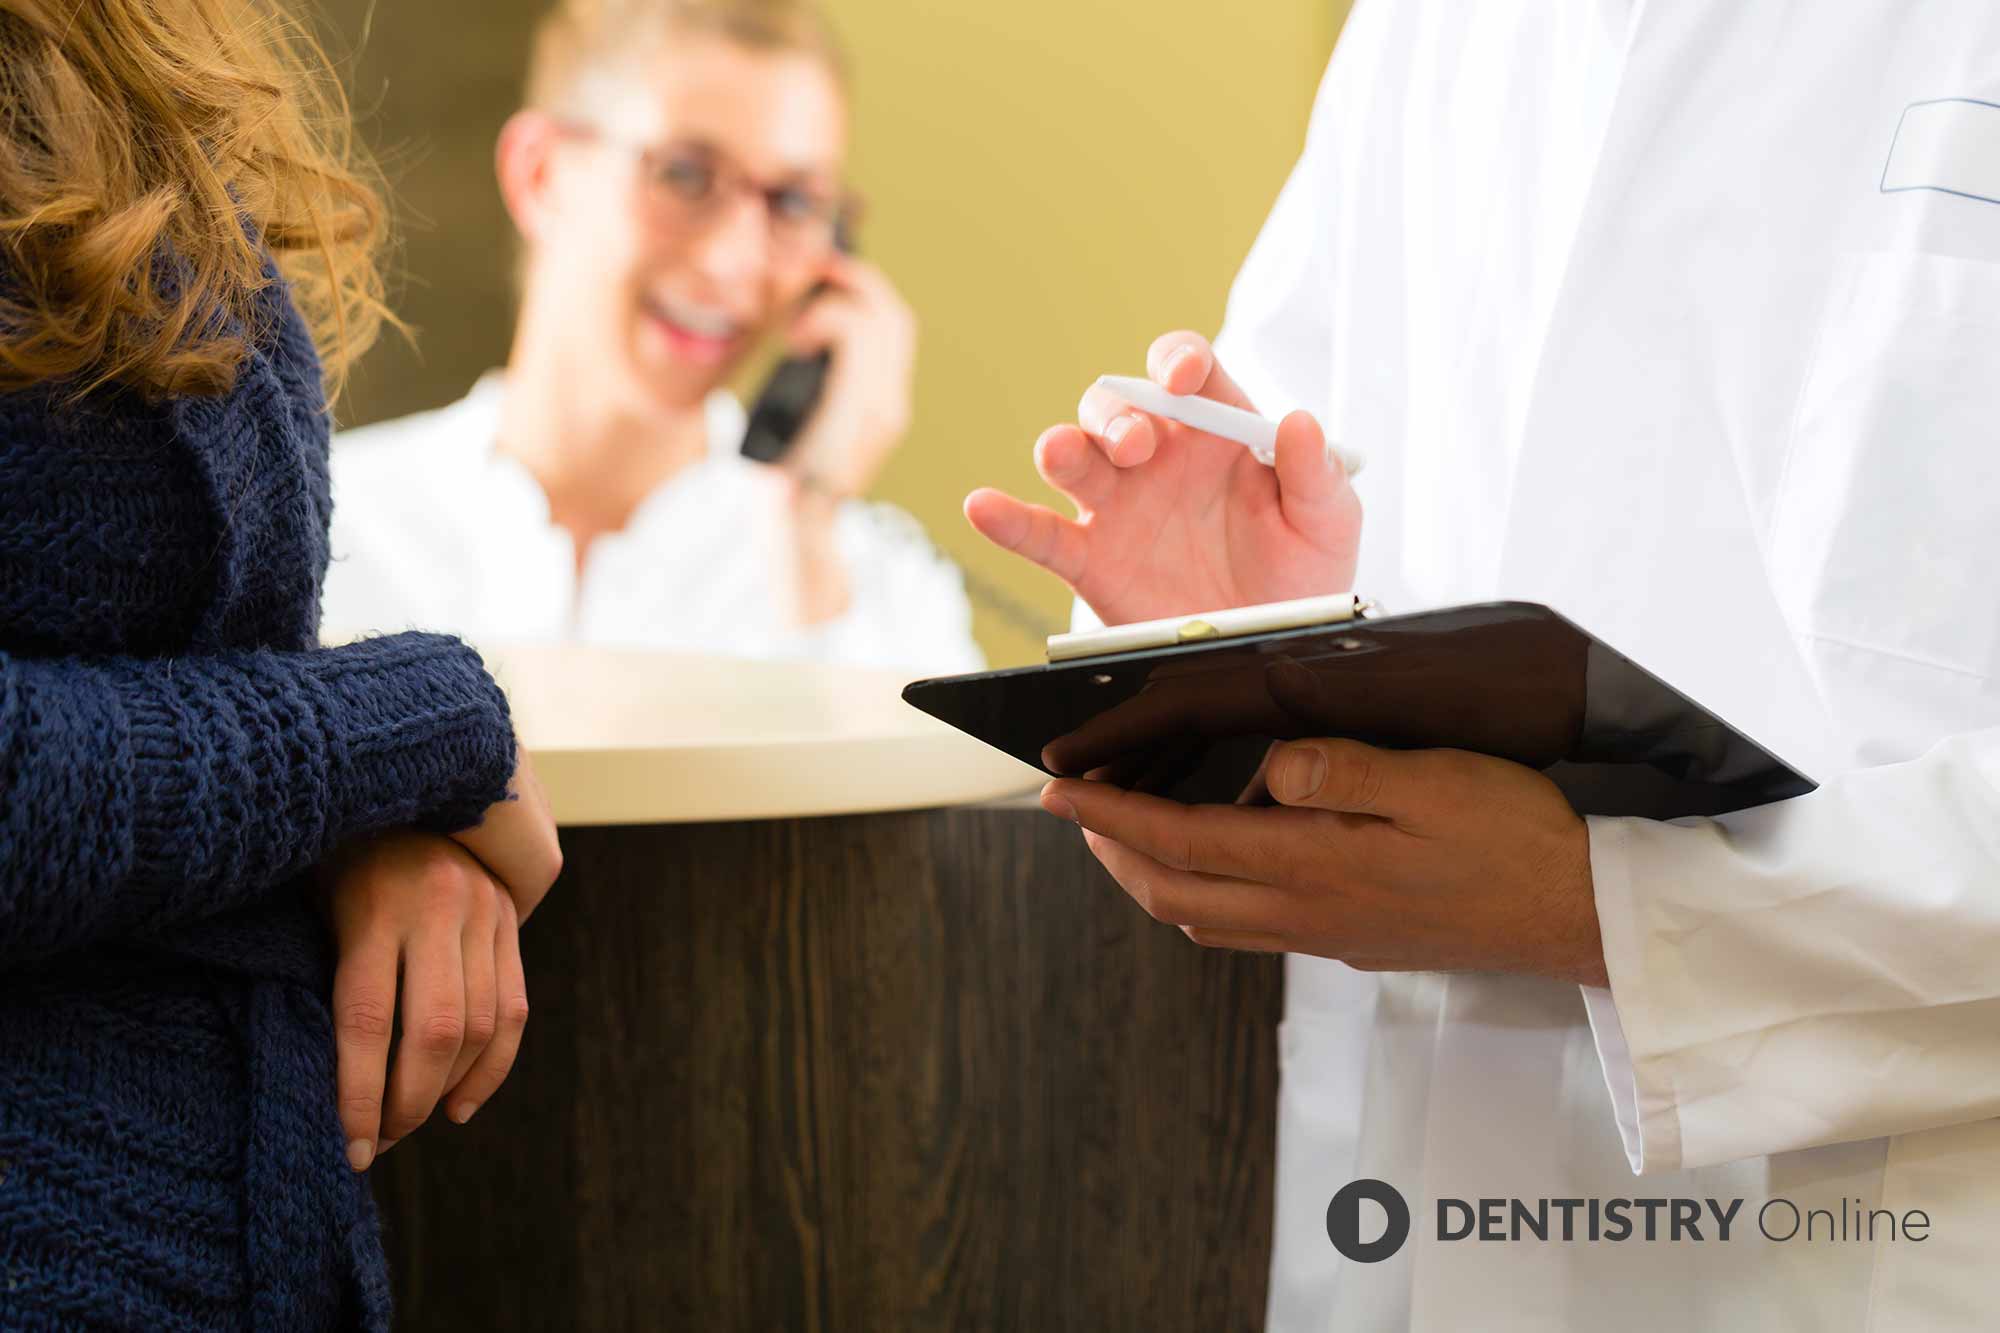 What are the common errors made by front desk staff in a dental practice? 